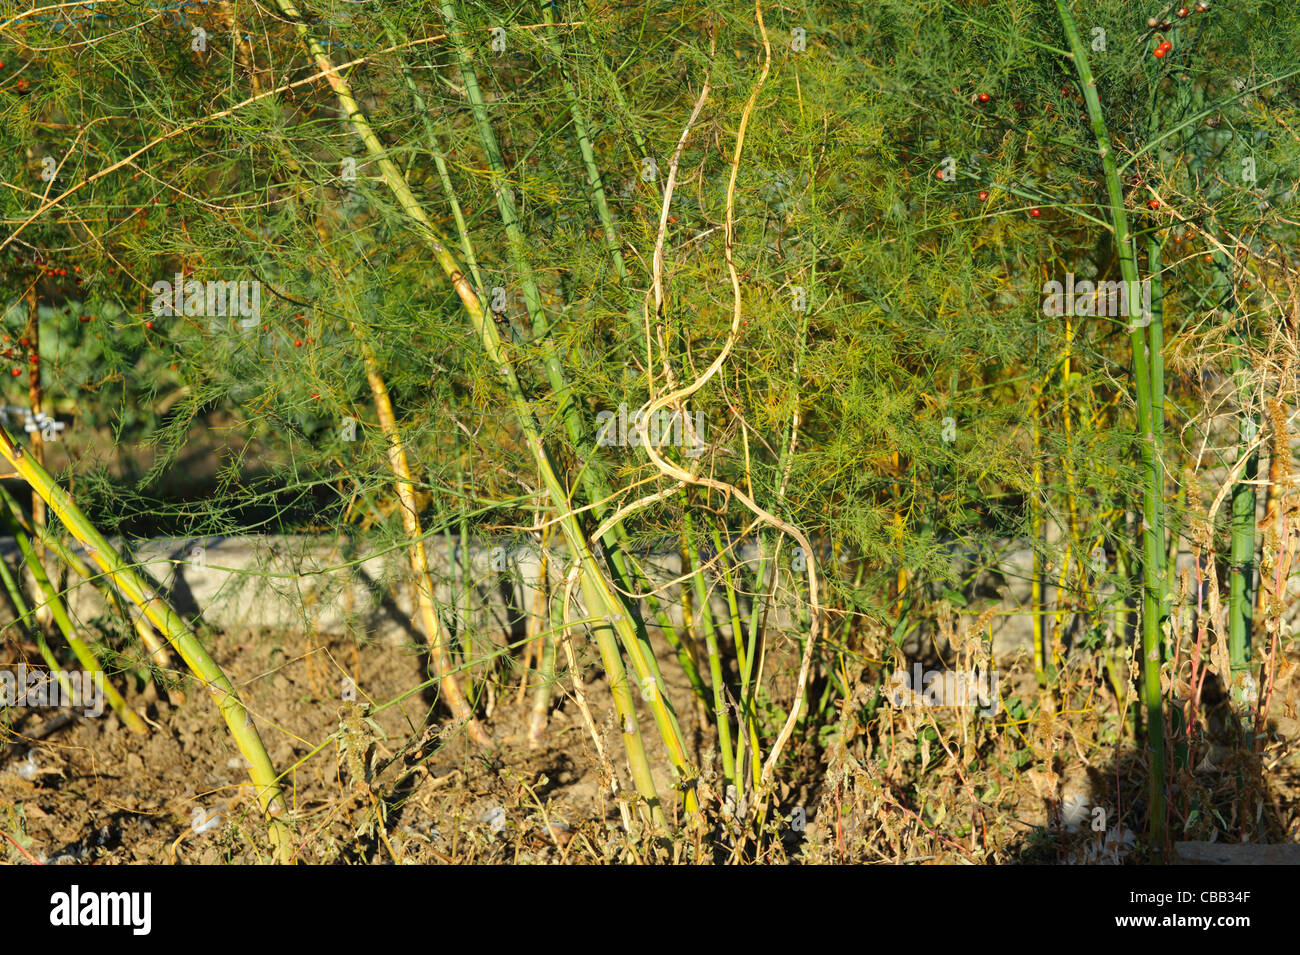 Stock Photo Of Asparagus Plants Nearly Ready For Cutting Back In Stock Photo Alamy